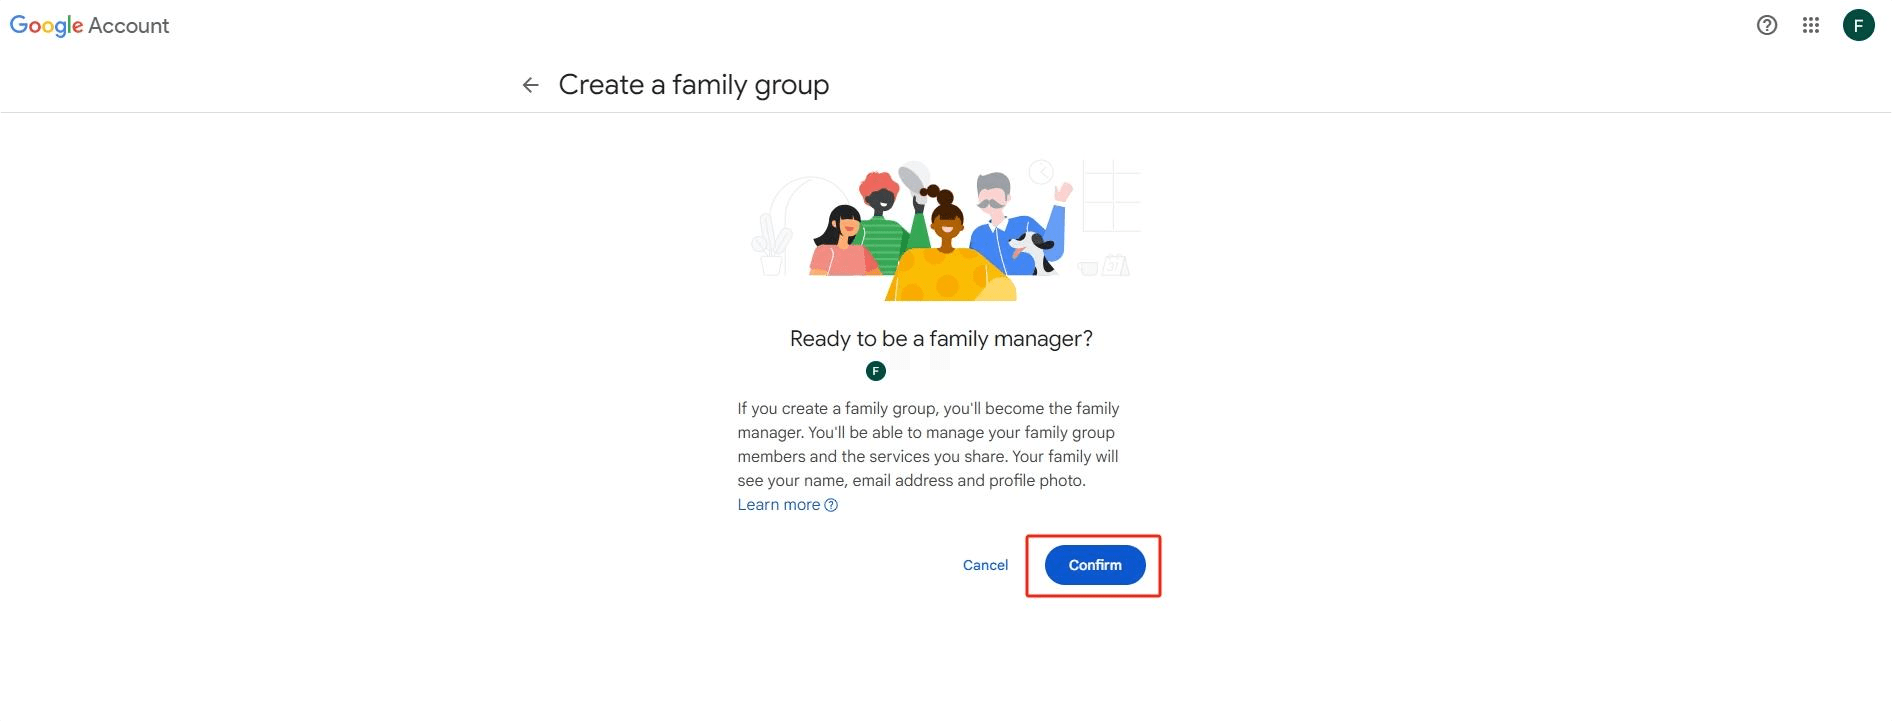 Confirm to Create a Google family group